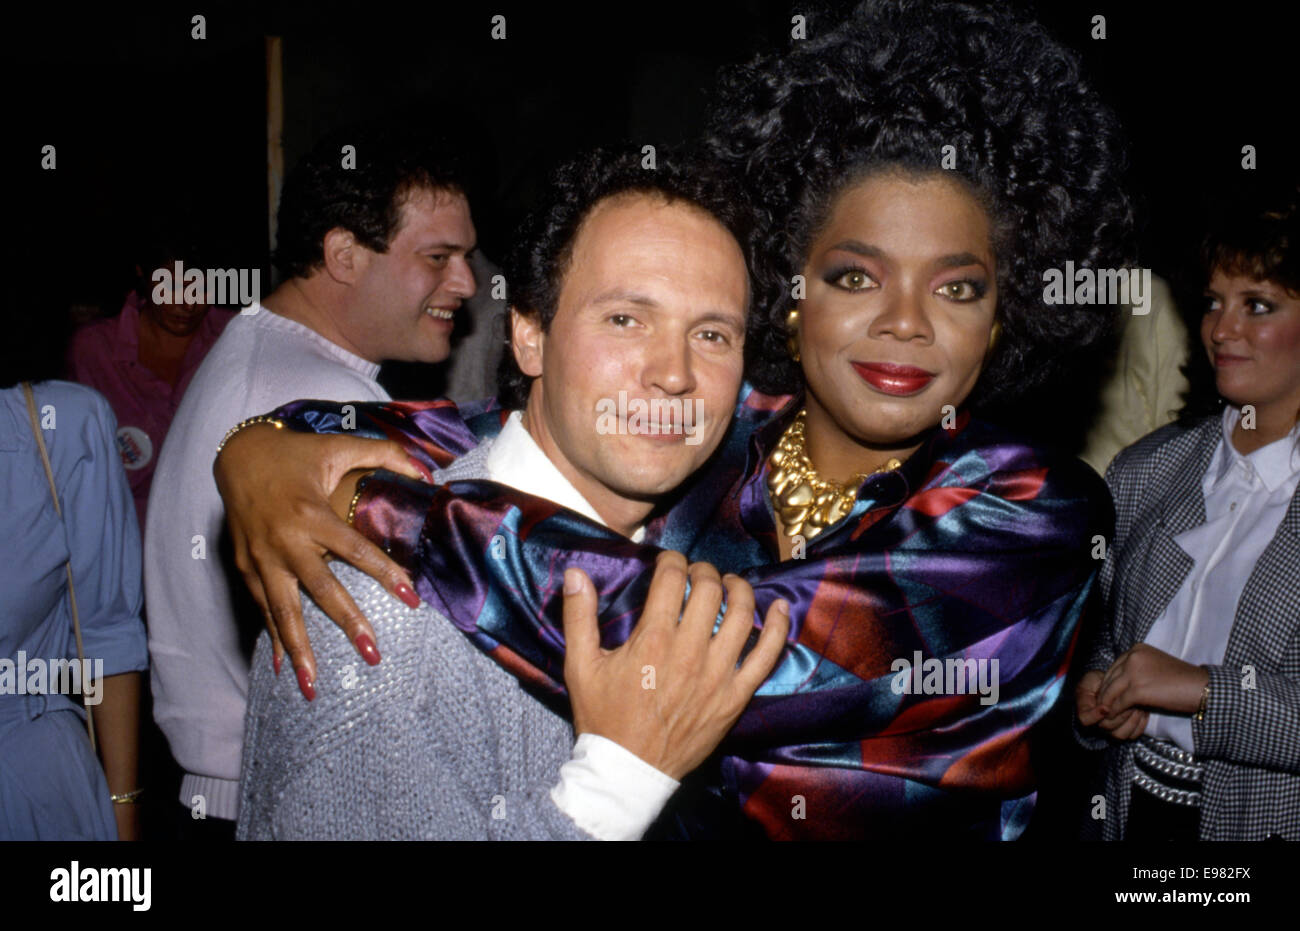 Billy Crystal and Oprah Winfrey at event promoting the first Comic Relief benefit circa 1986 Stock Photo